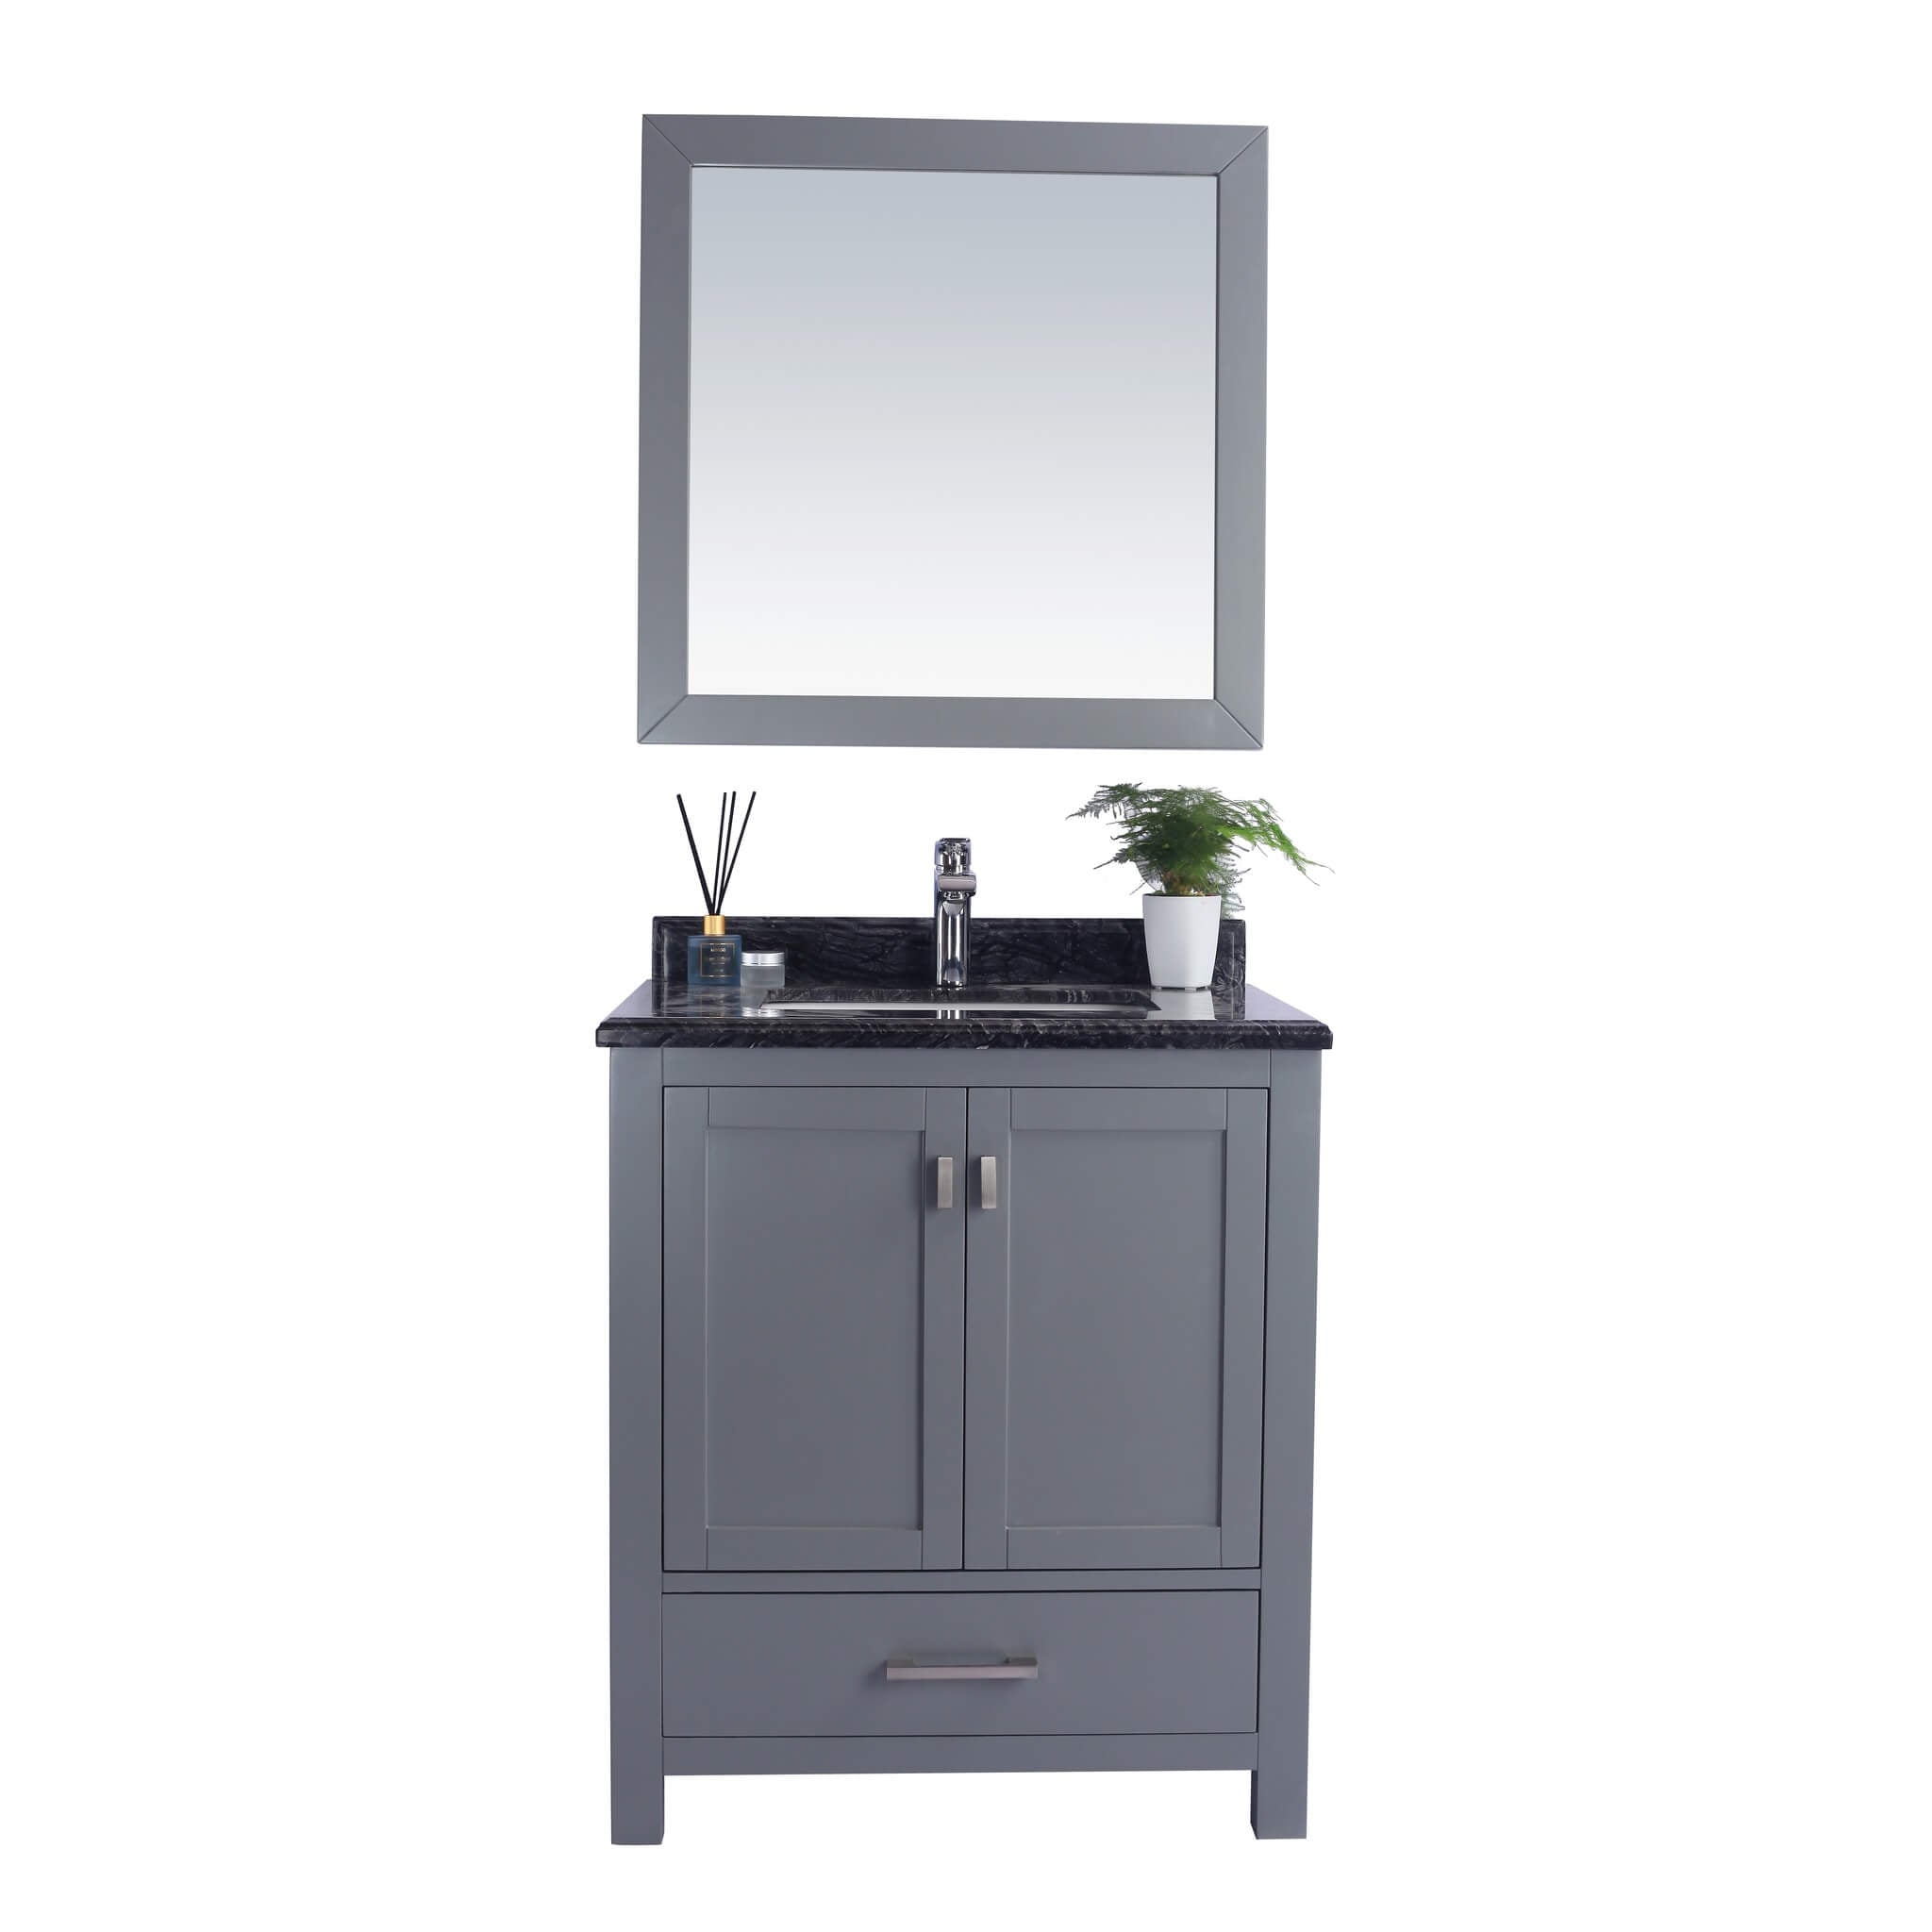 LAVIVA Wilson 313ANG-30G-BW 30" Single Bathroom Vanity in Grey with Black Wood Marble, White Rectangle Sink, Front View